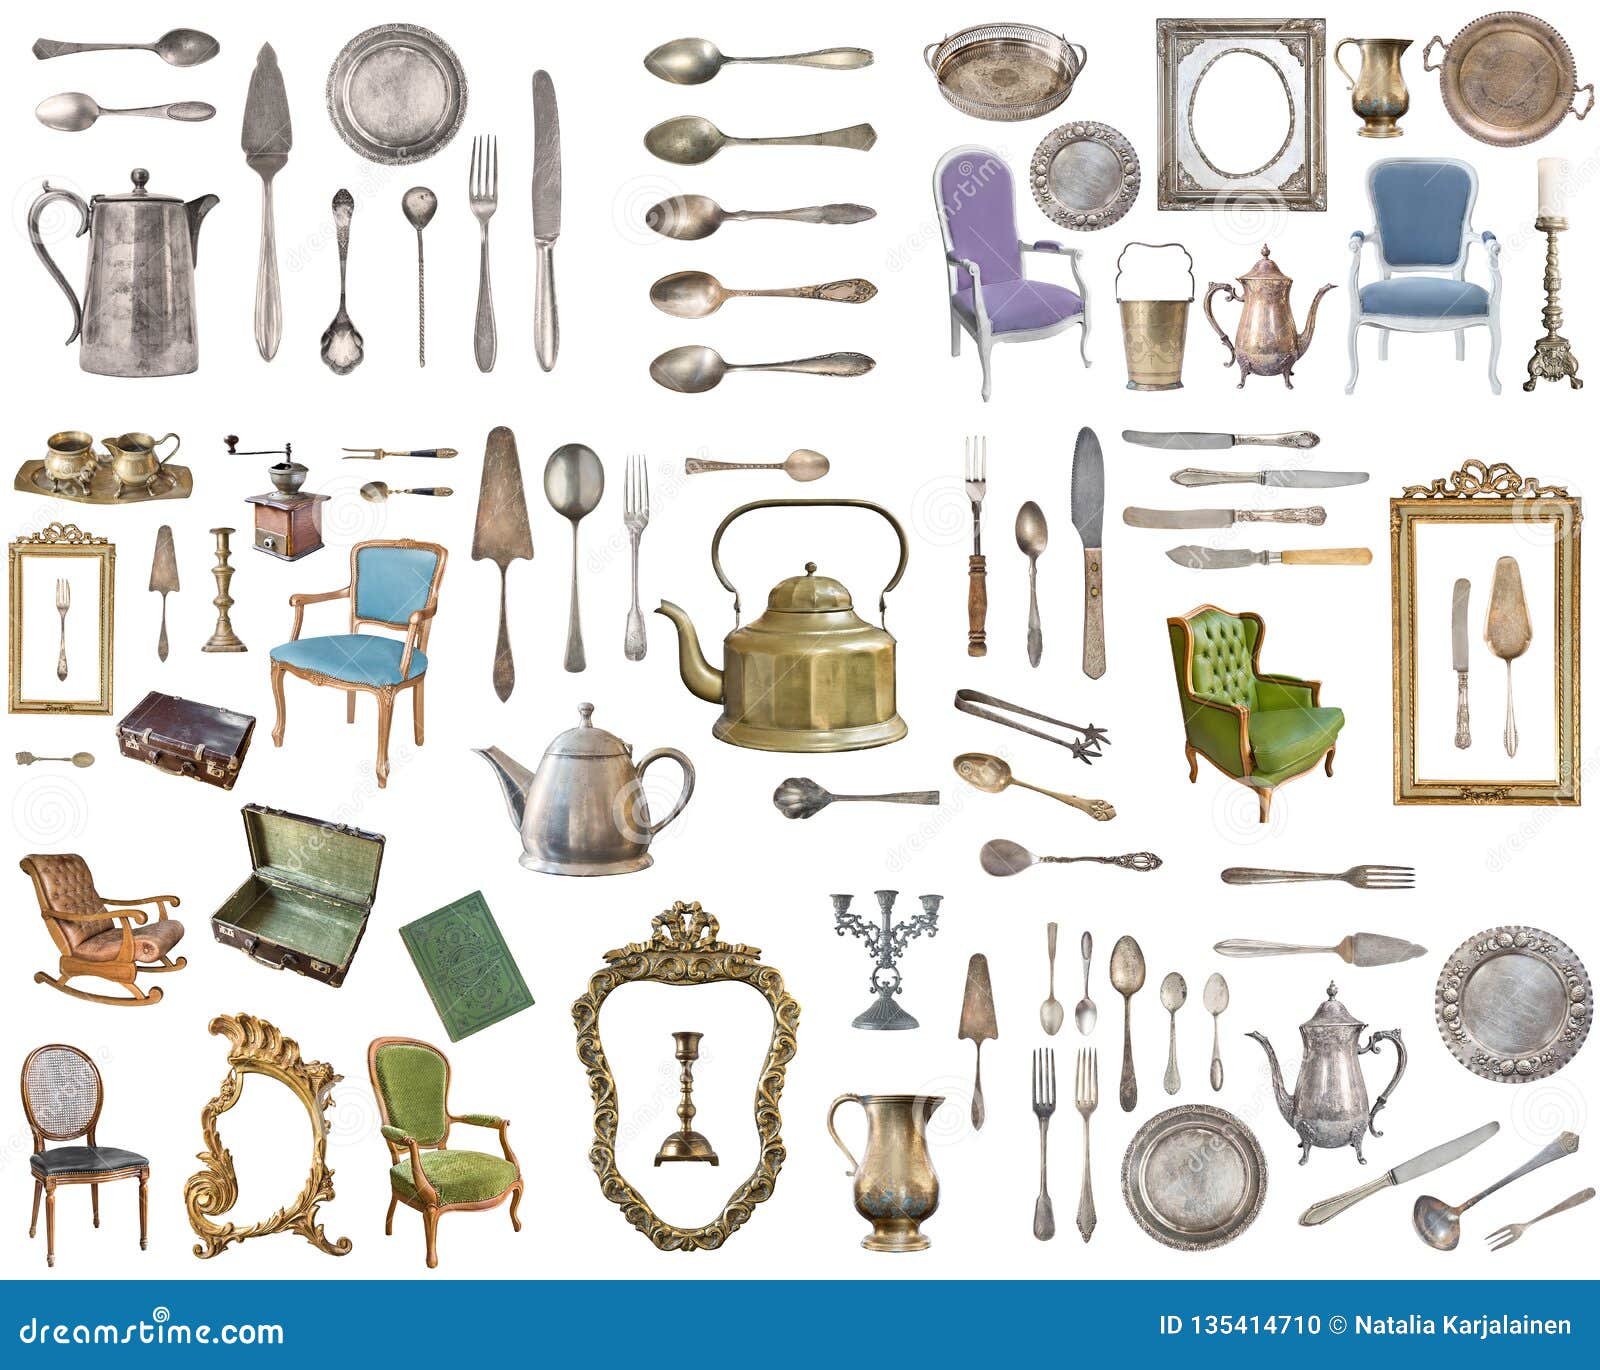 huge set of antique items.vintage household items, silverware, furniture and more.  on white background